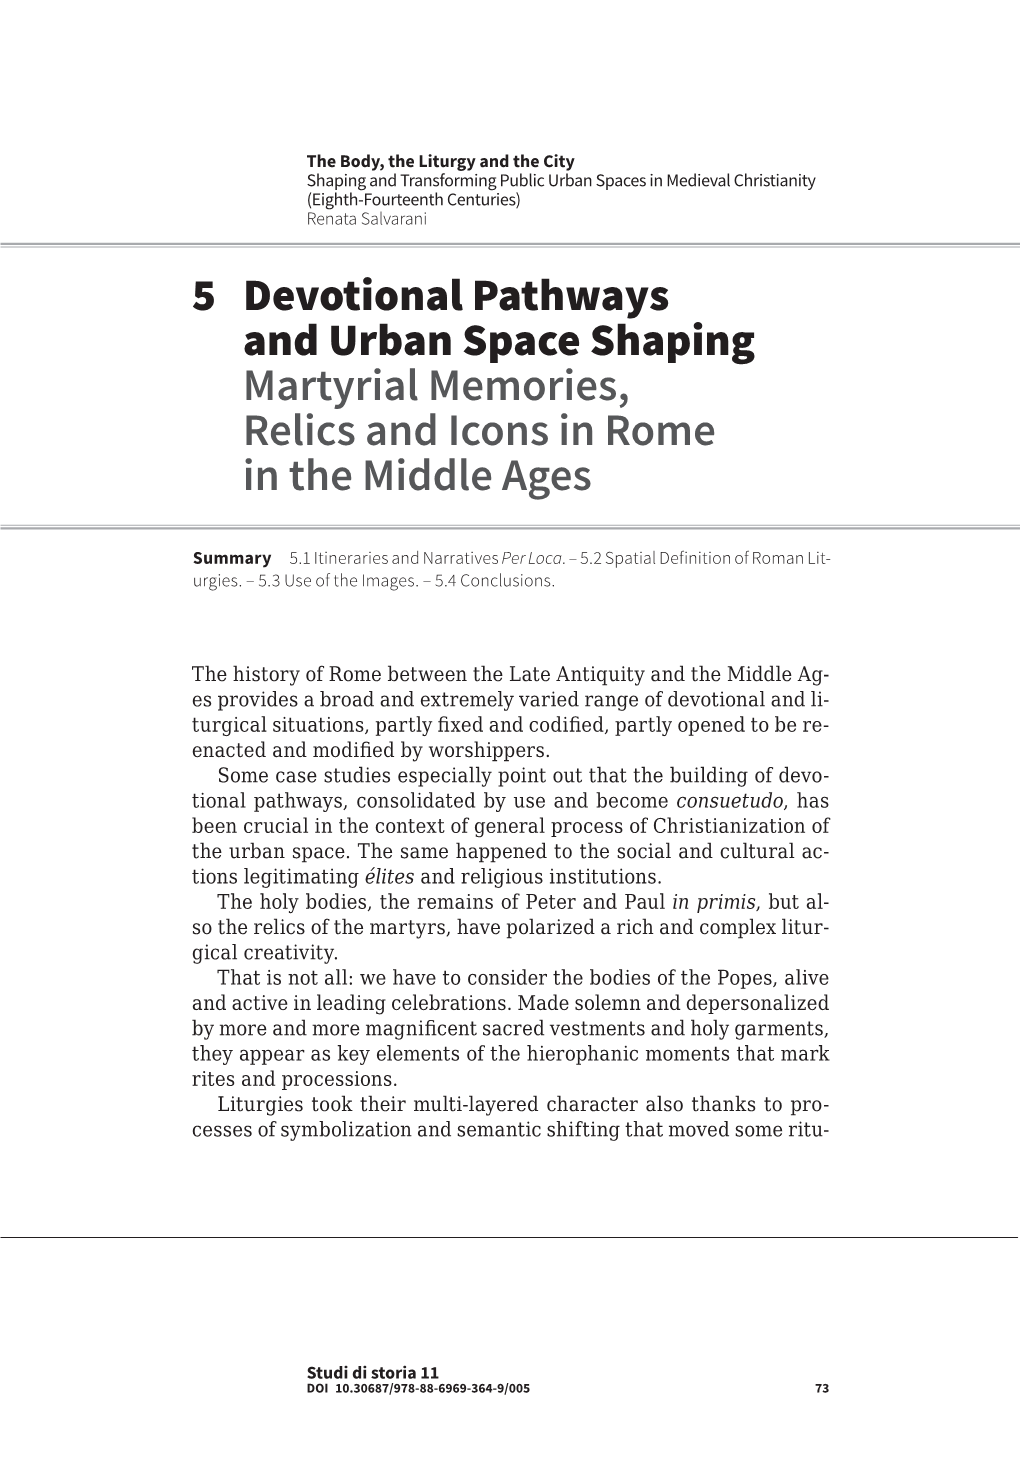 5 Devotional Pathways and Urban Space Shaping Martyrial Memories, Relics and Icons in Rome in the Middle Ages